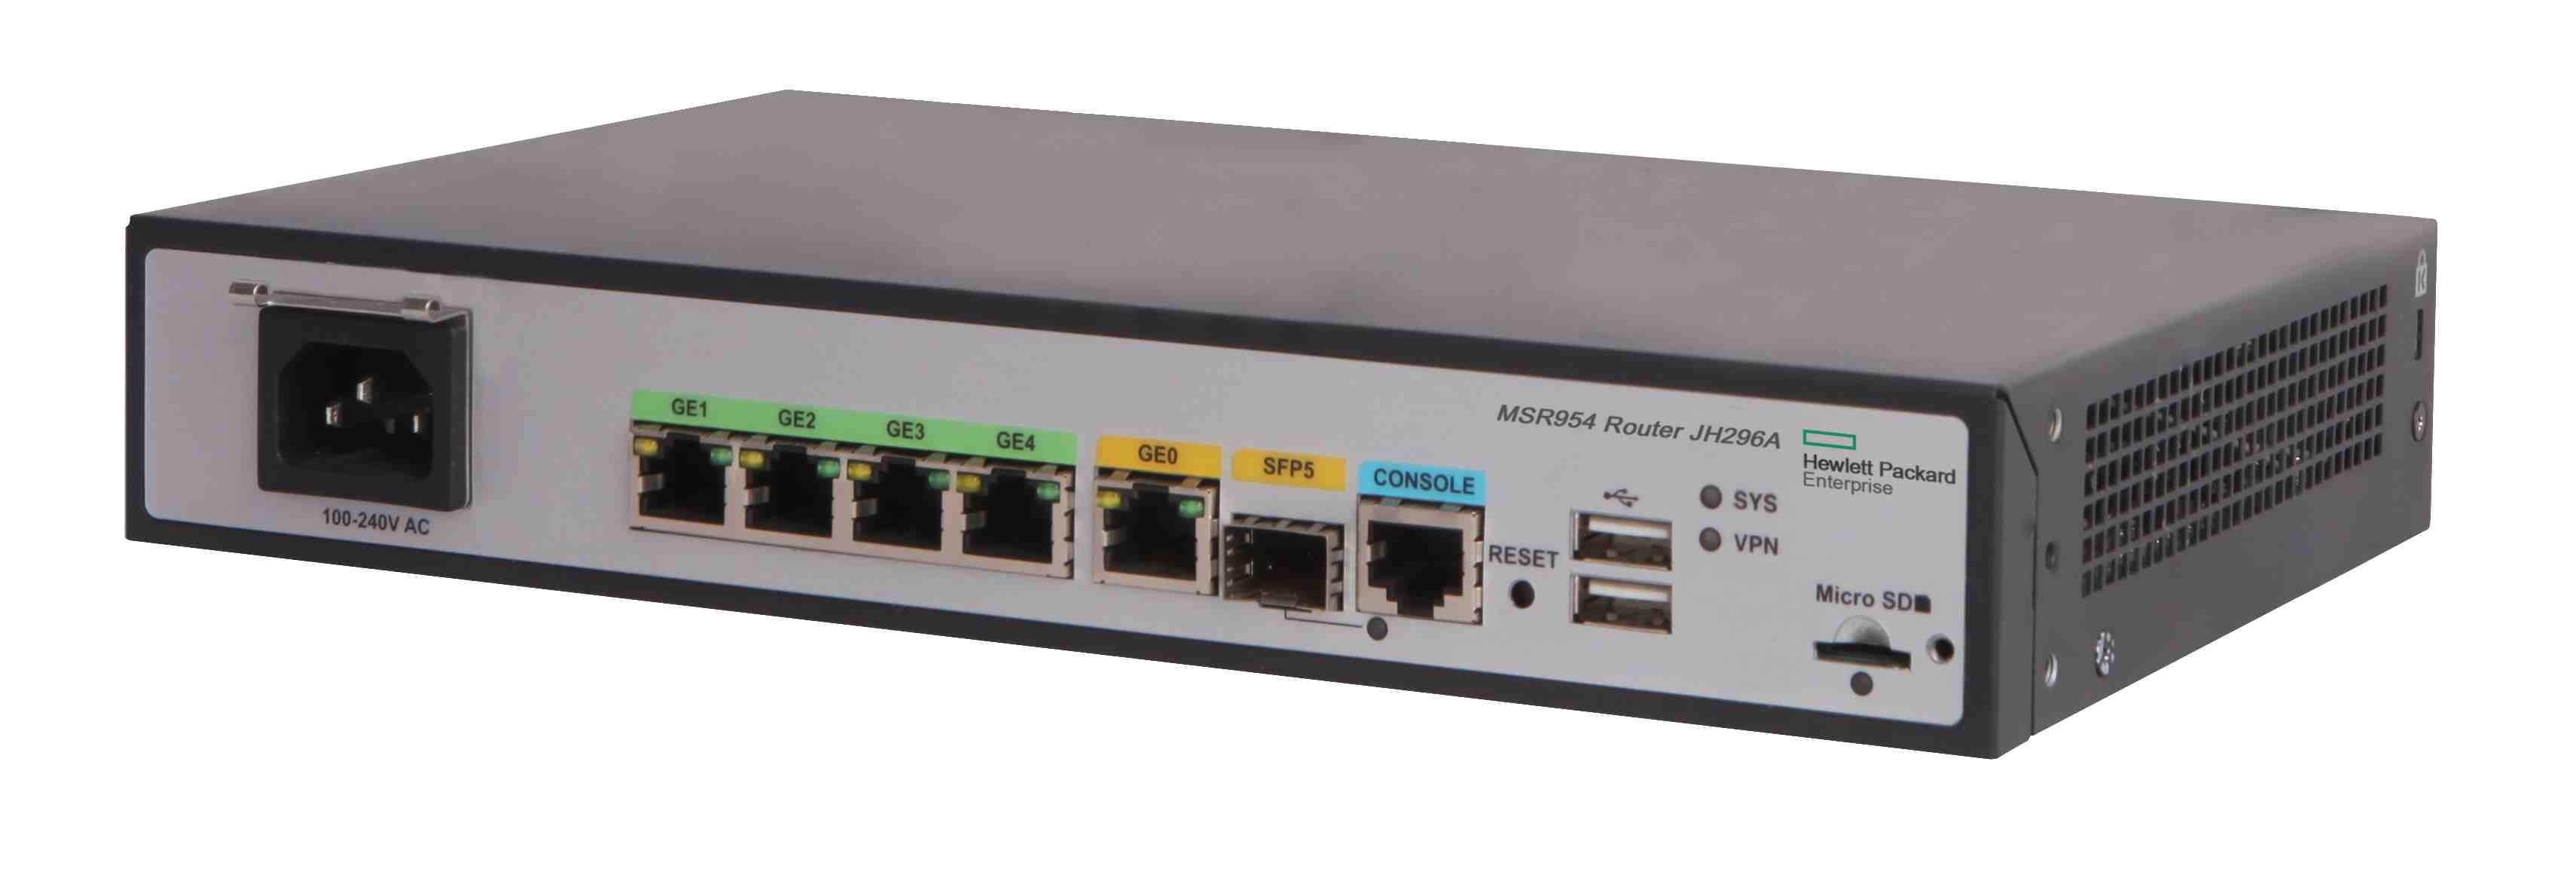 HPE MSR954 1GbE SFP Router0 